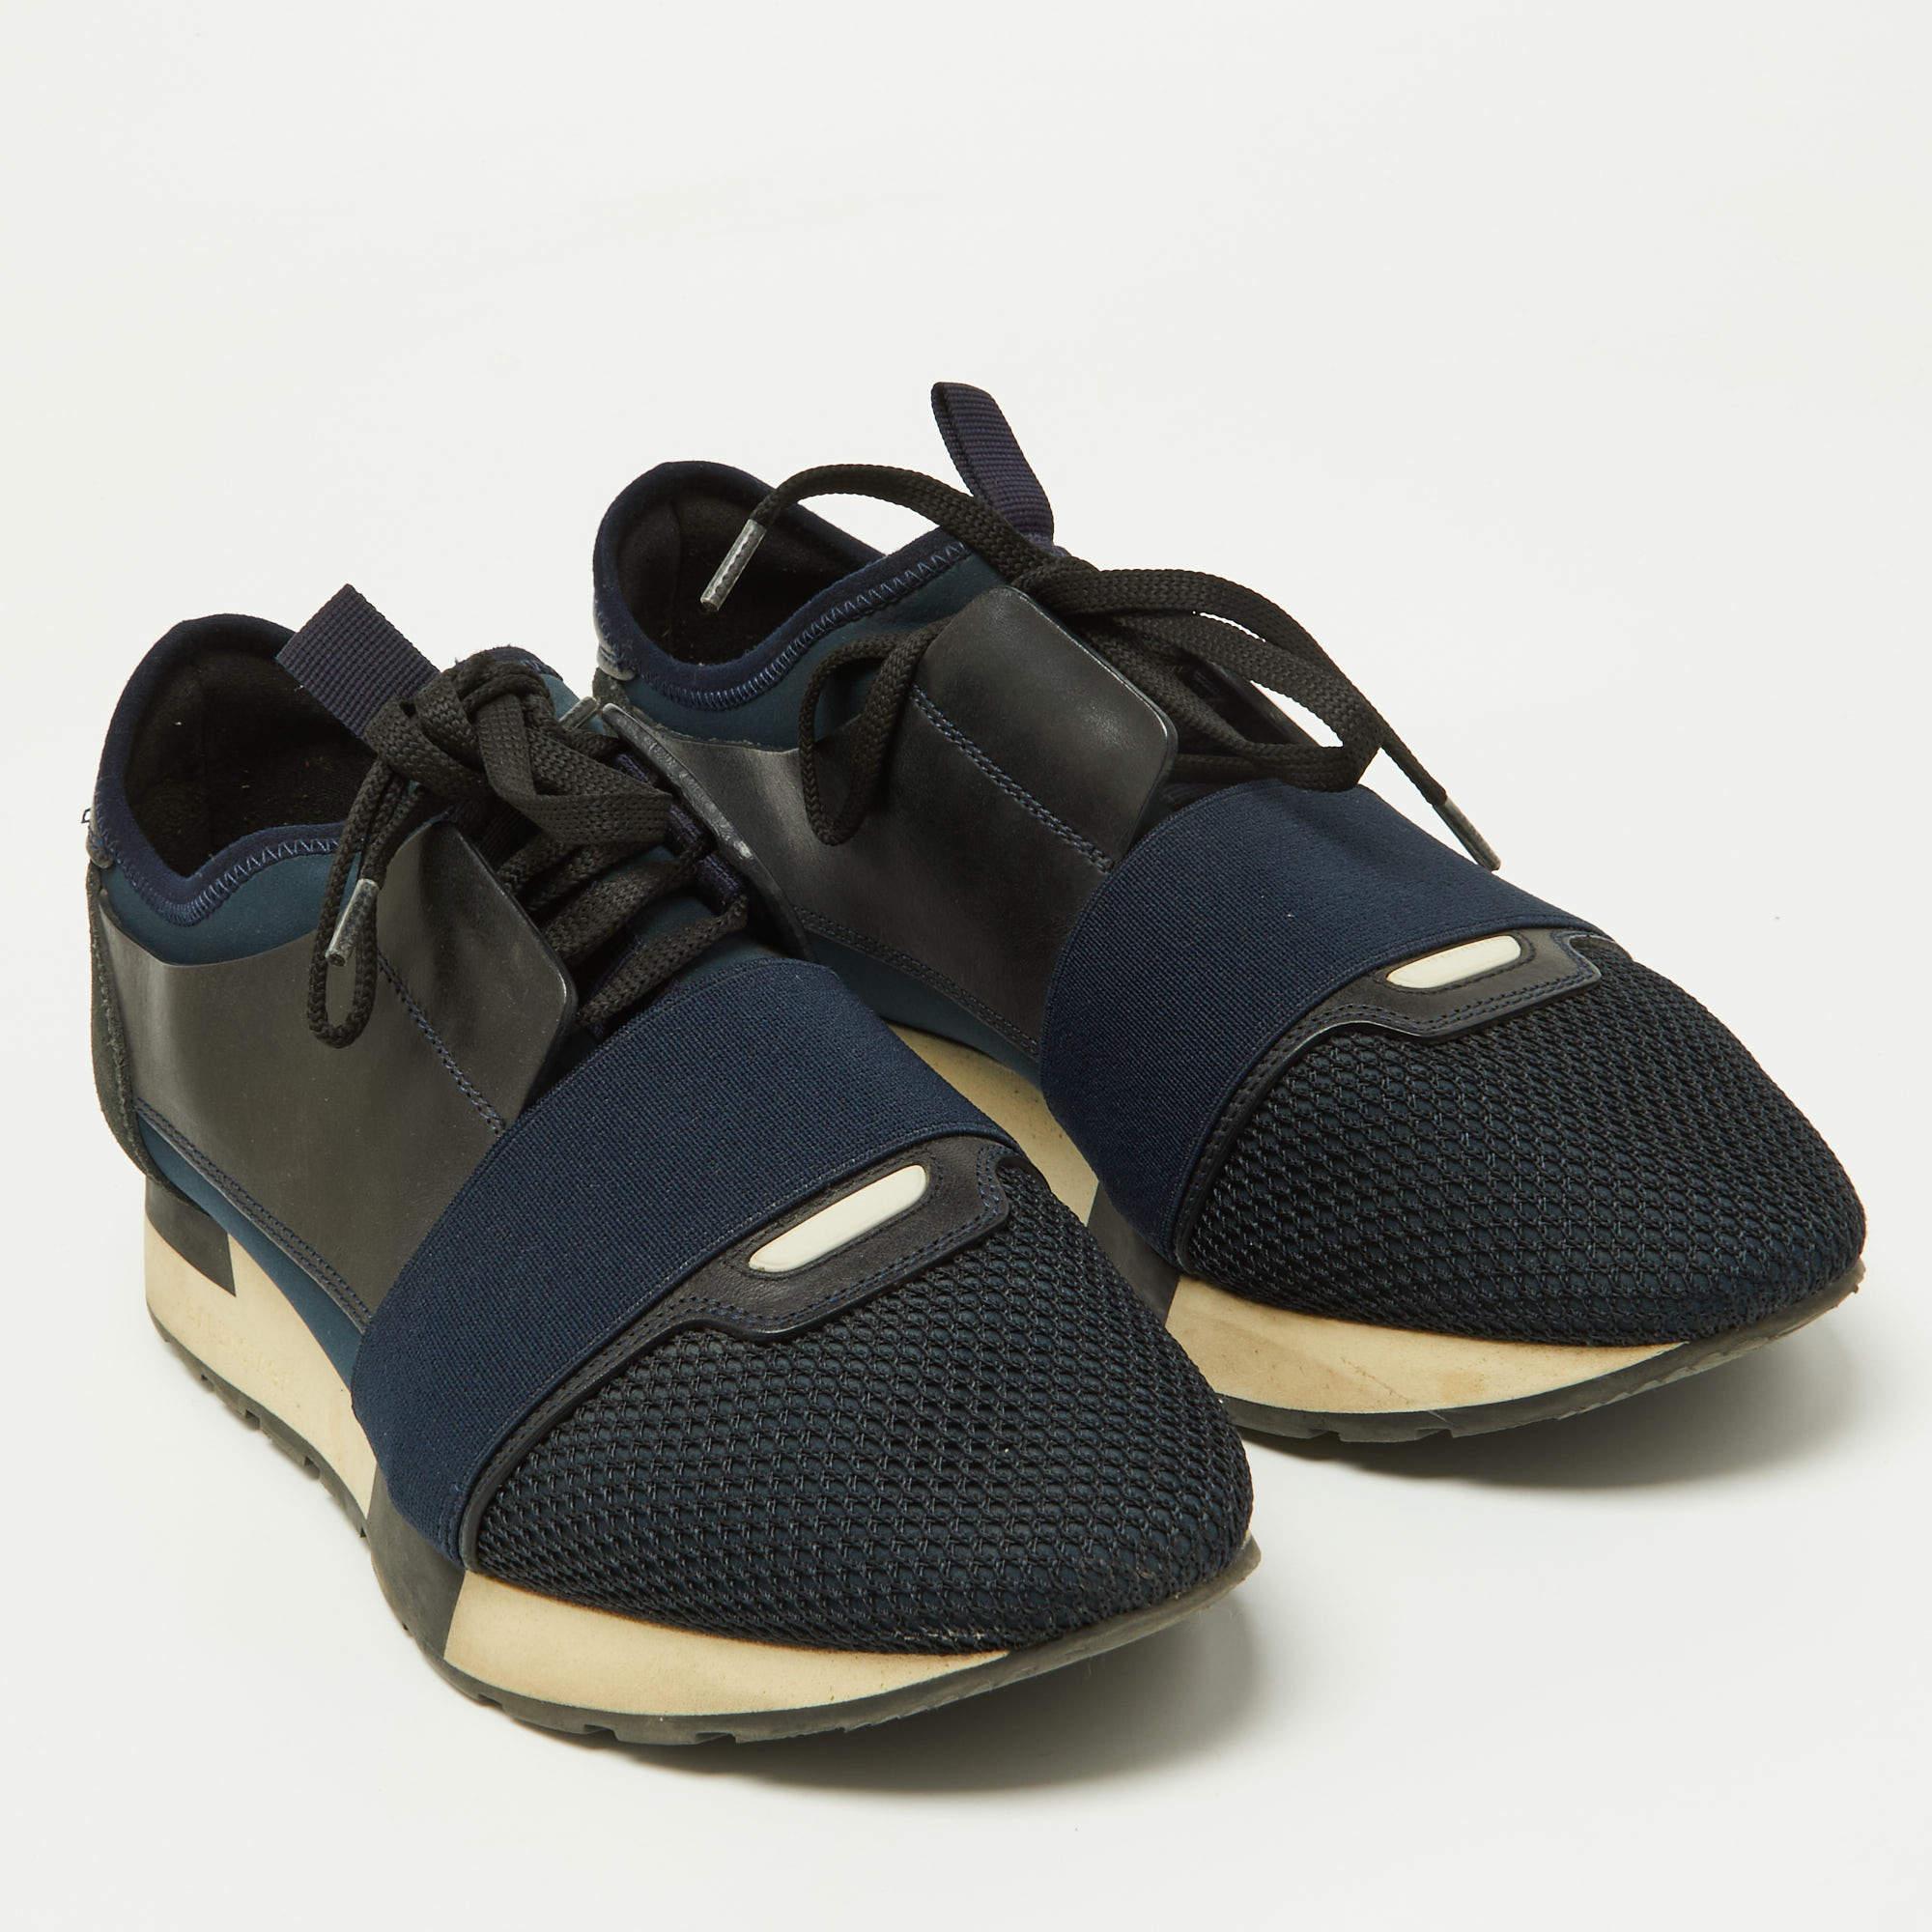 Balenciaga Black/Navy Blue Leather, Mesh and Suede Race Runner Sneakers Size 39 In Good Condition For Sale In Dubai, Al Qouz 2